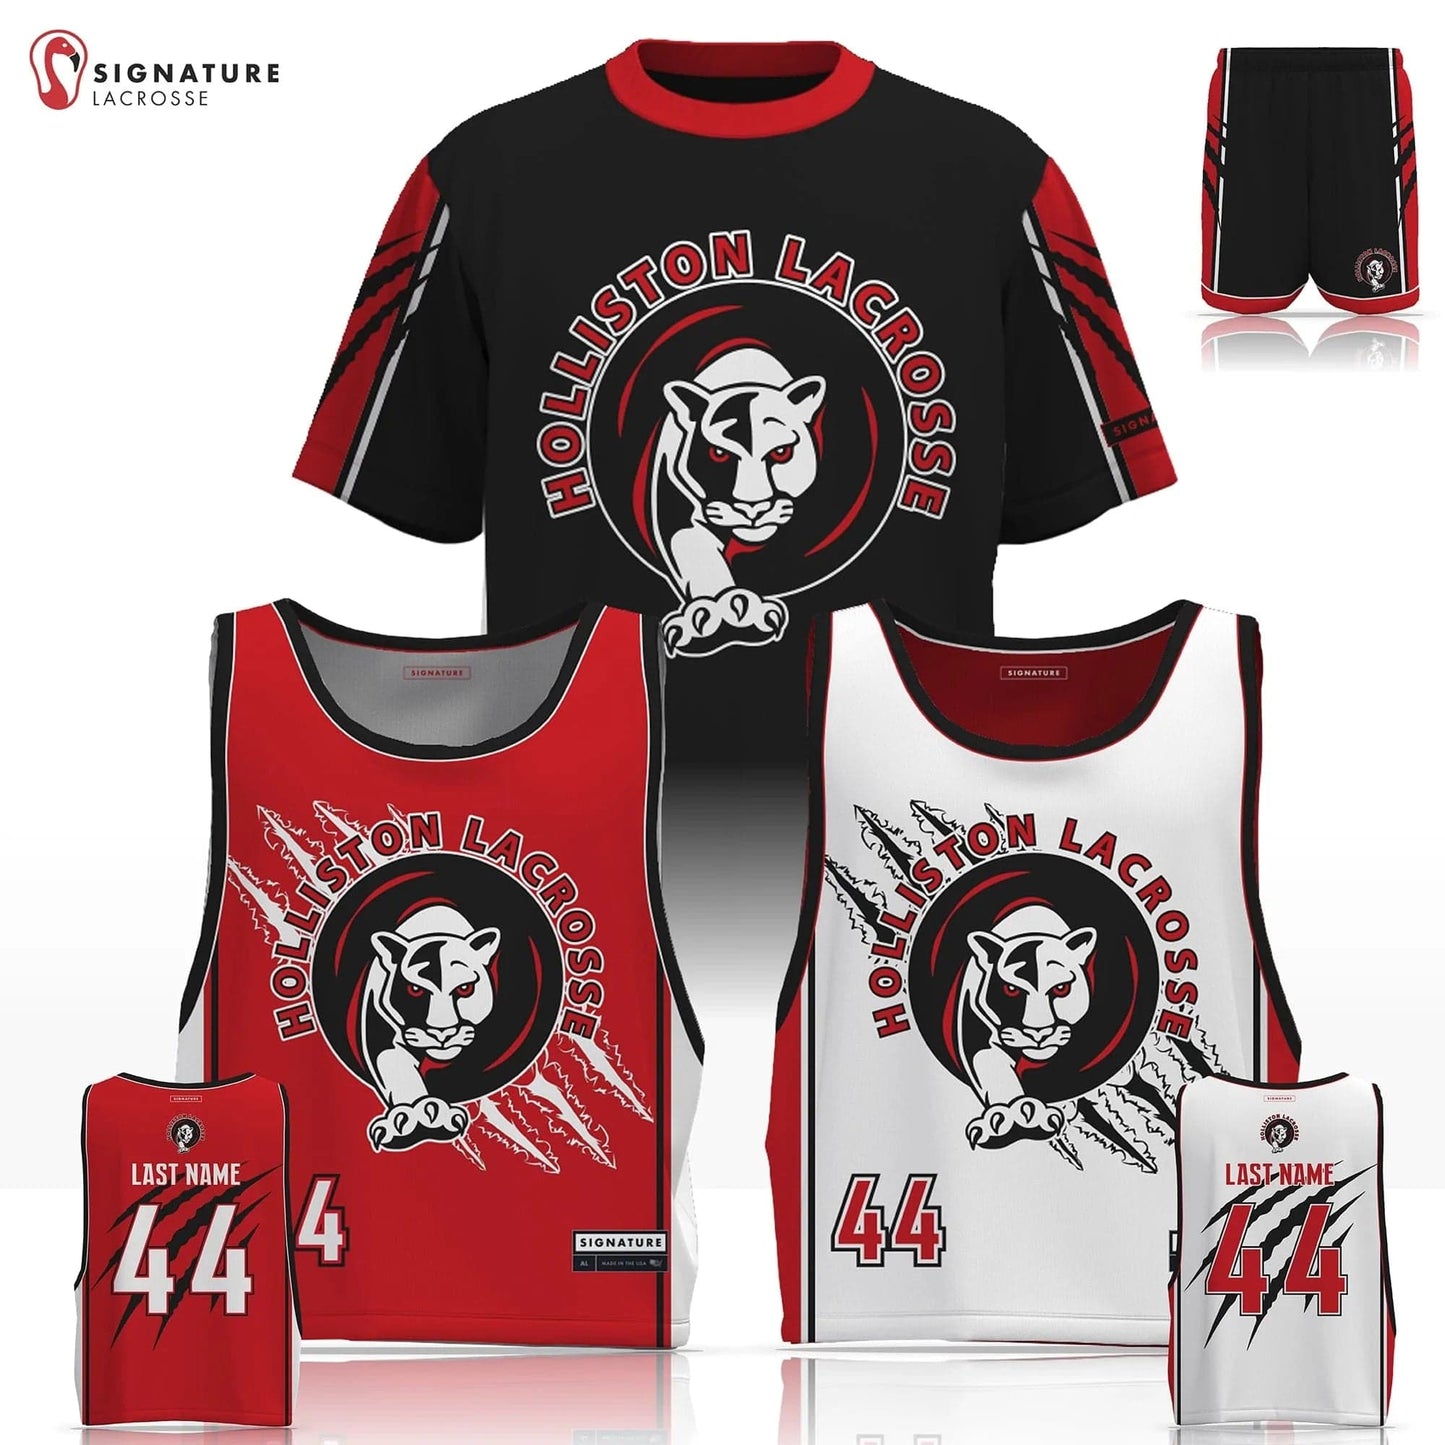 Holliston Youth Lacrosse Men's 3 Piece Player Game Package: Grade 5 & 6 Signature Lacrosse